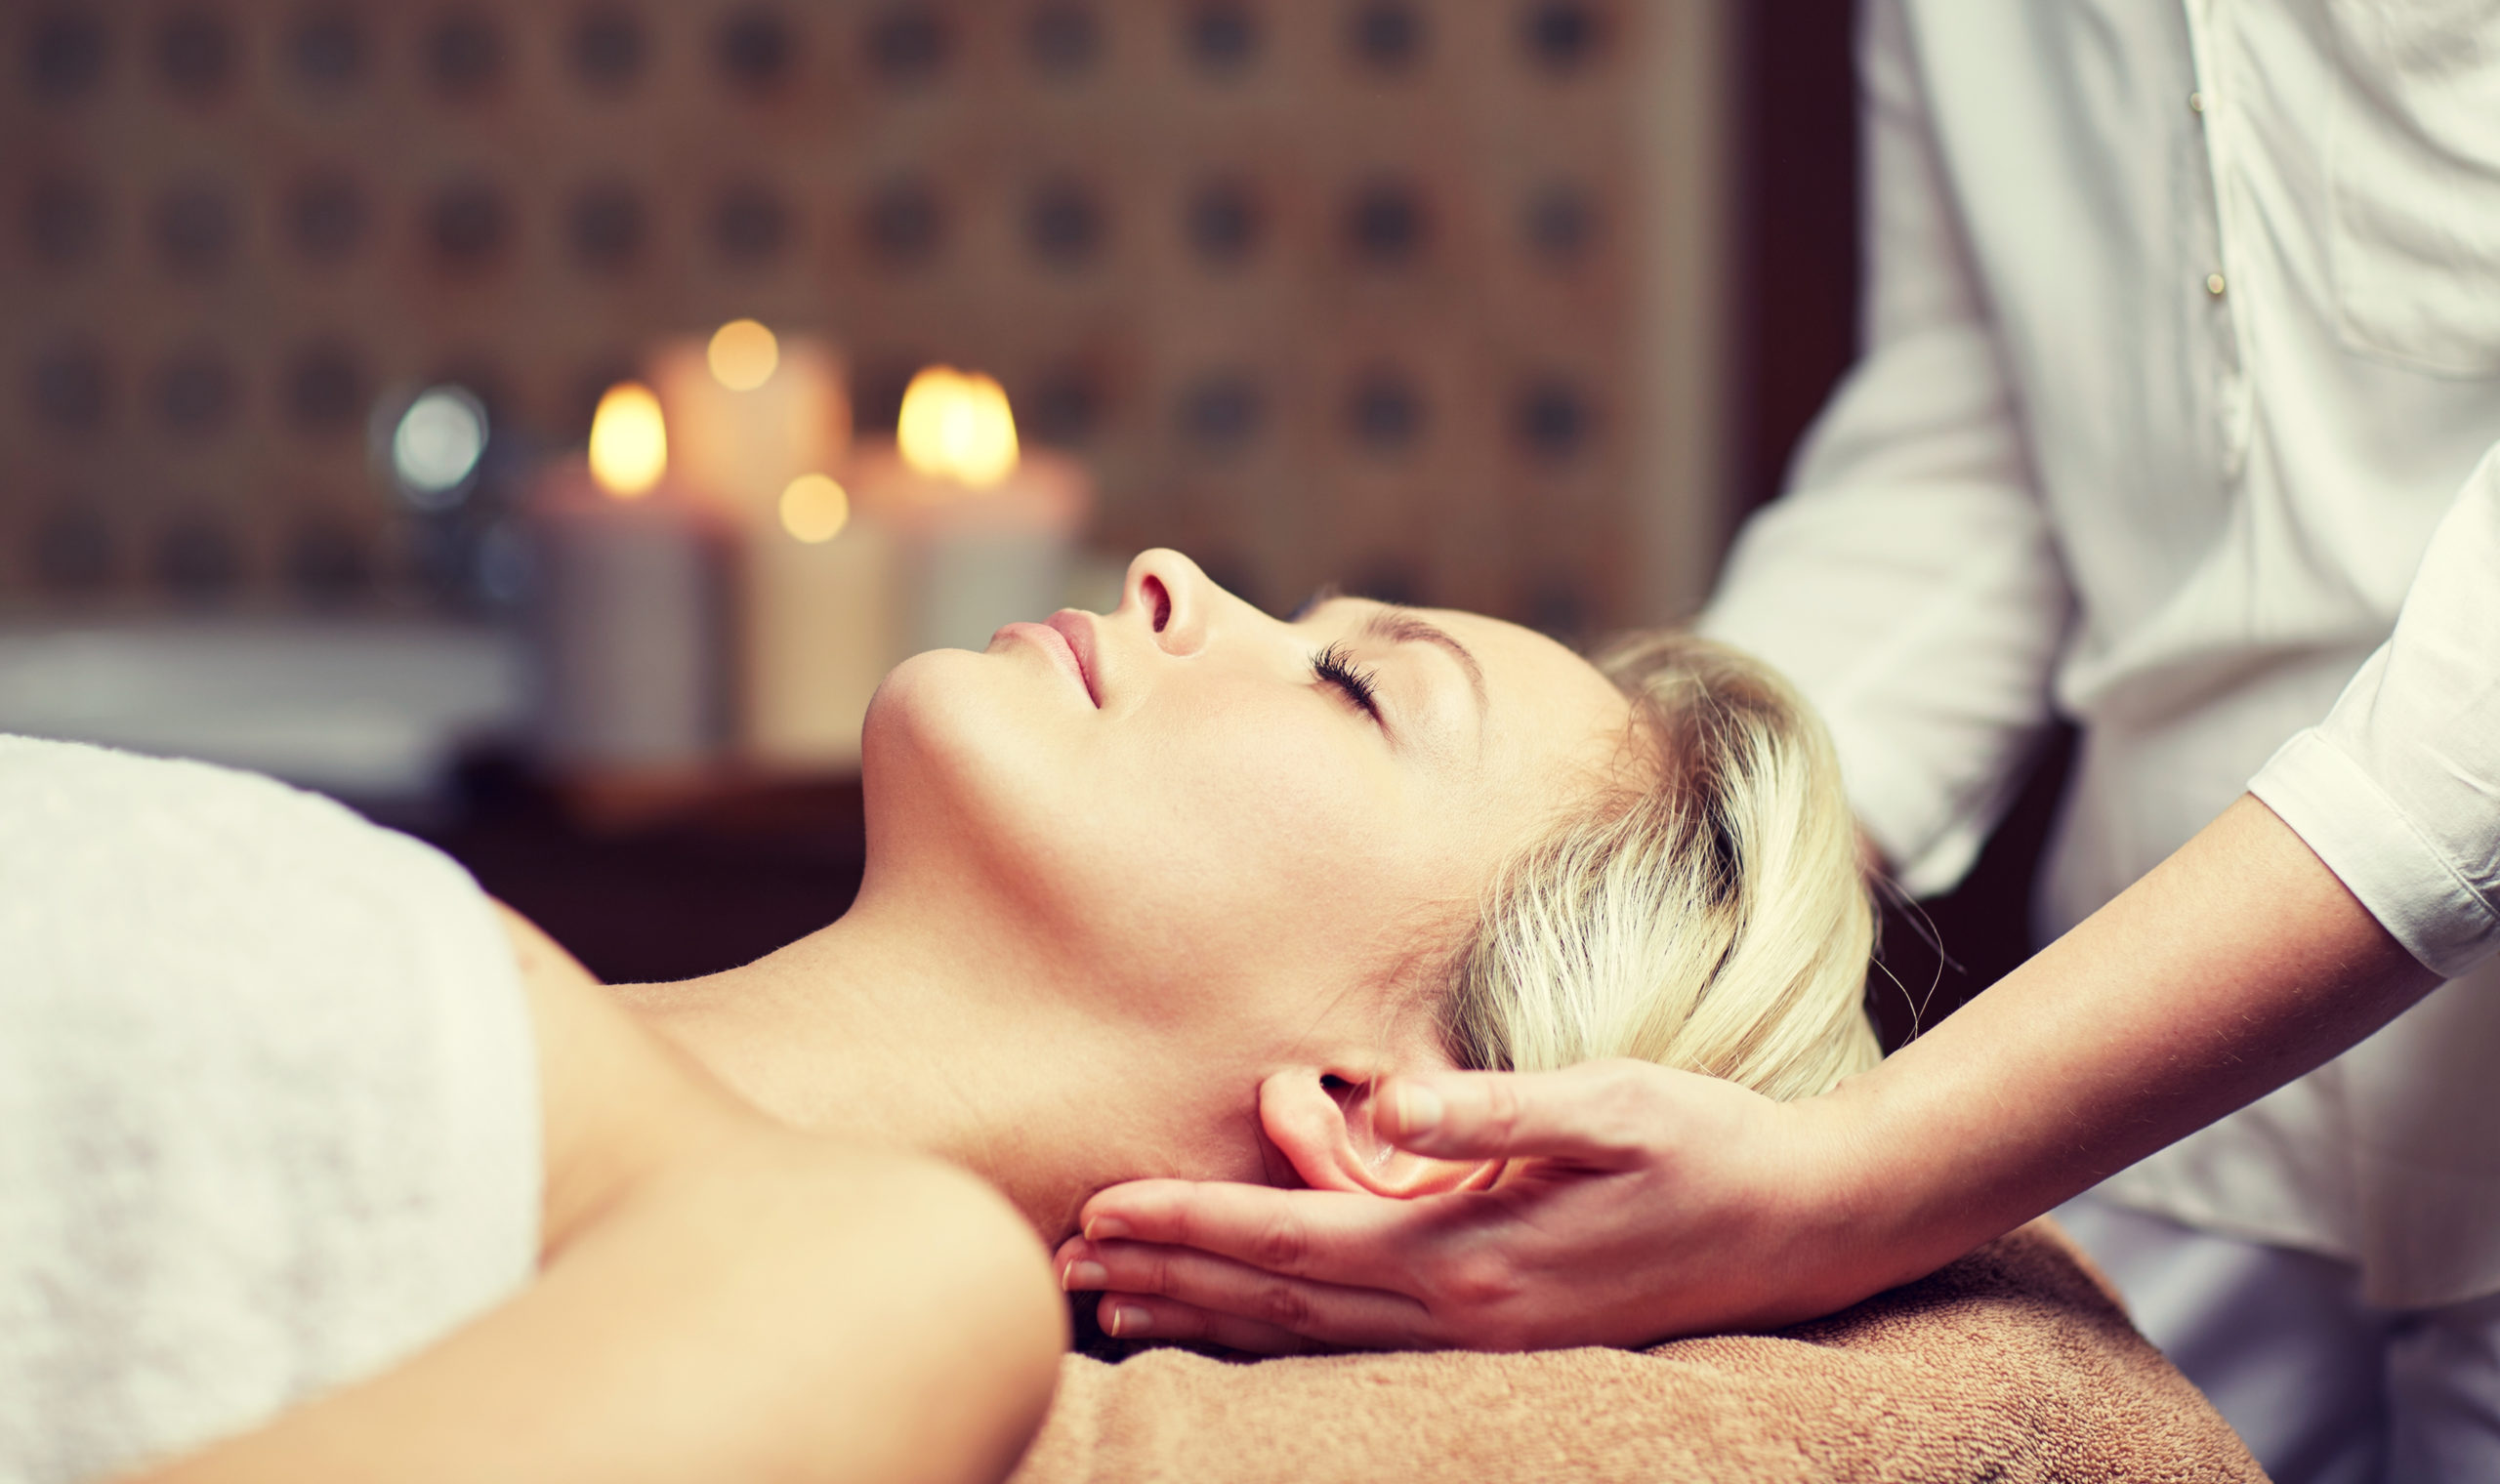 Can Massage Therapy Help With a Pinched Nerve? - Faces Spa